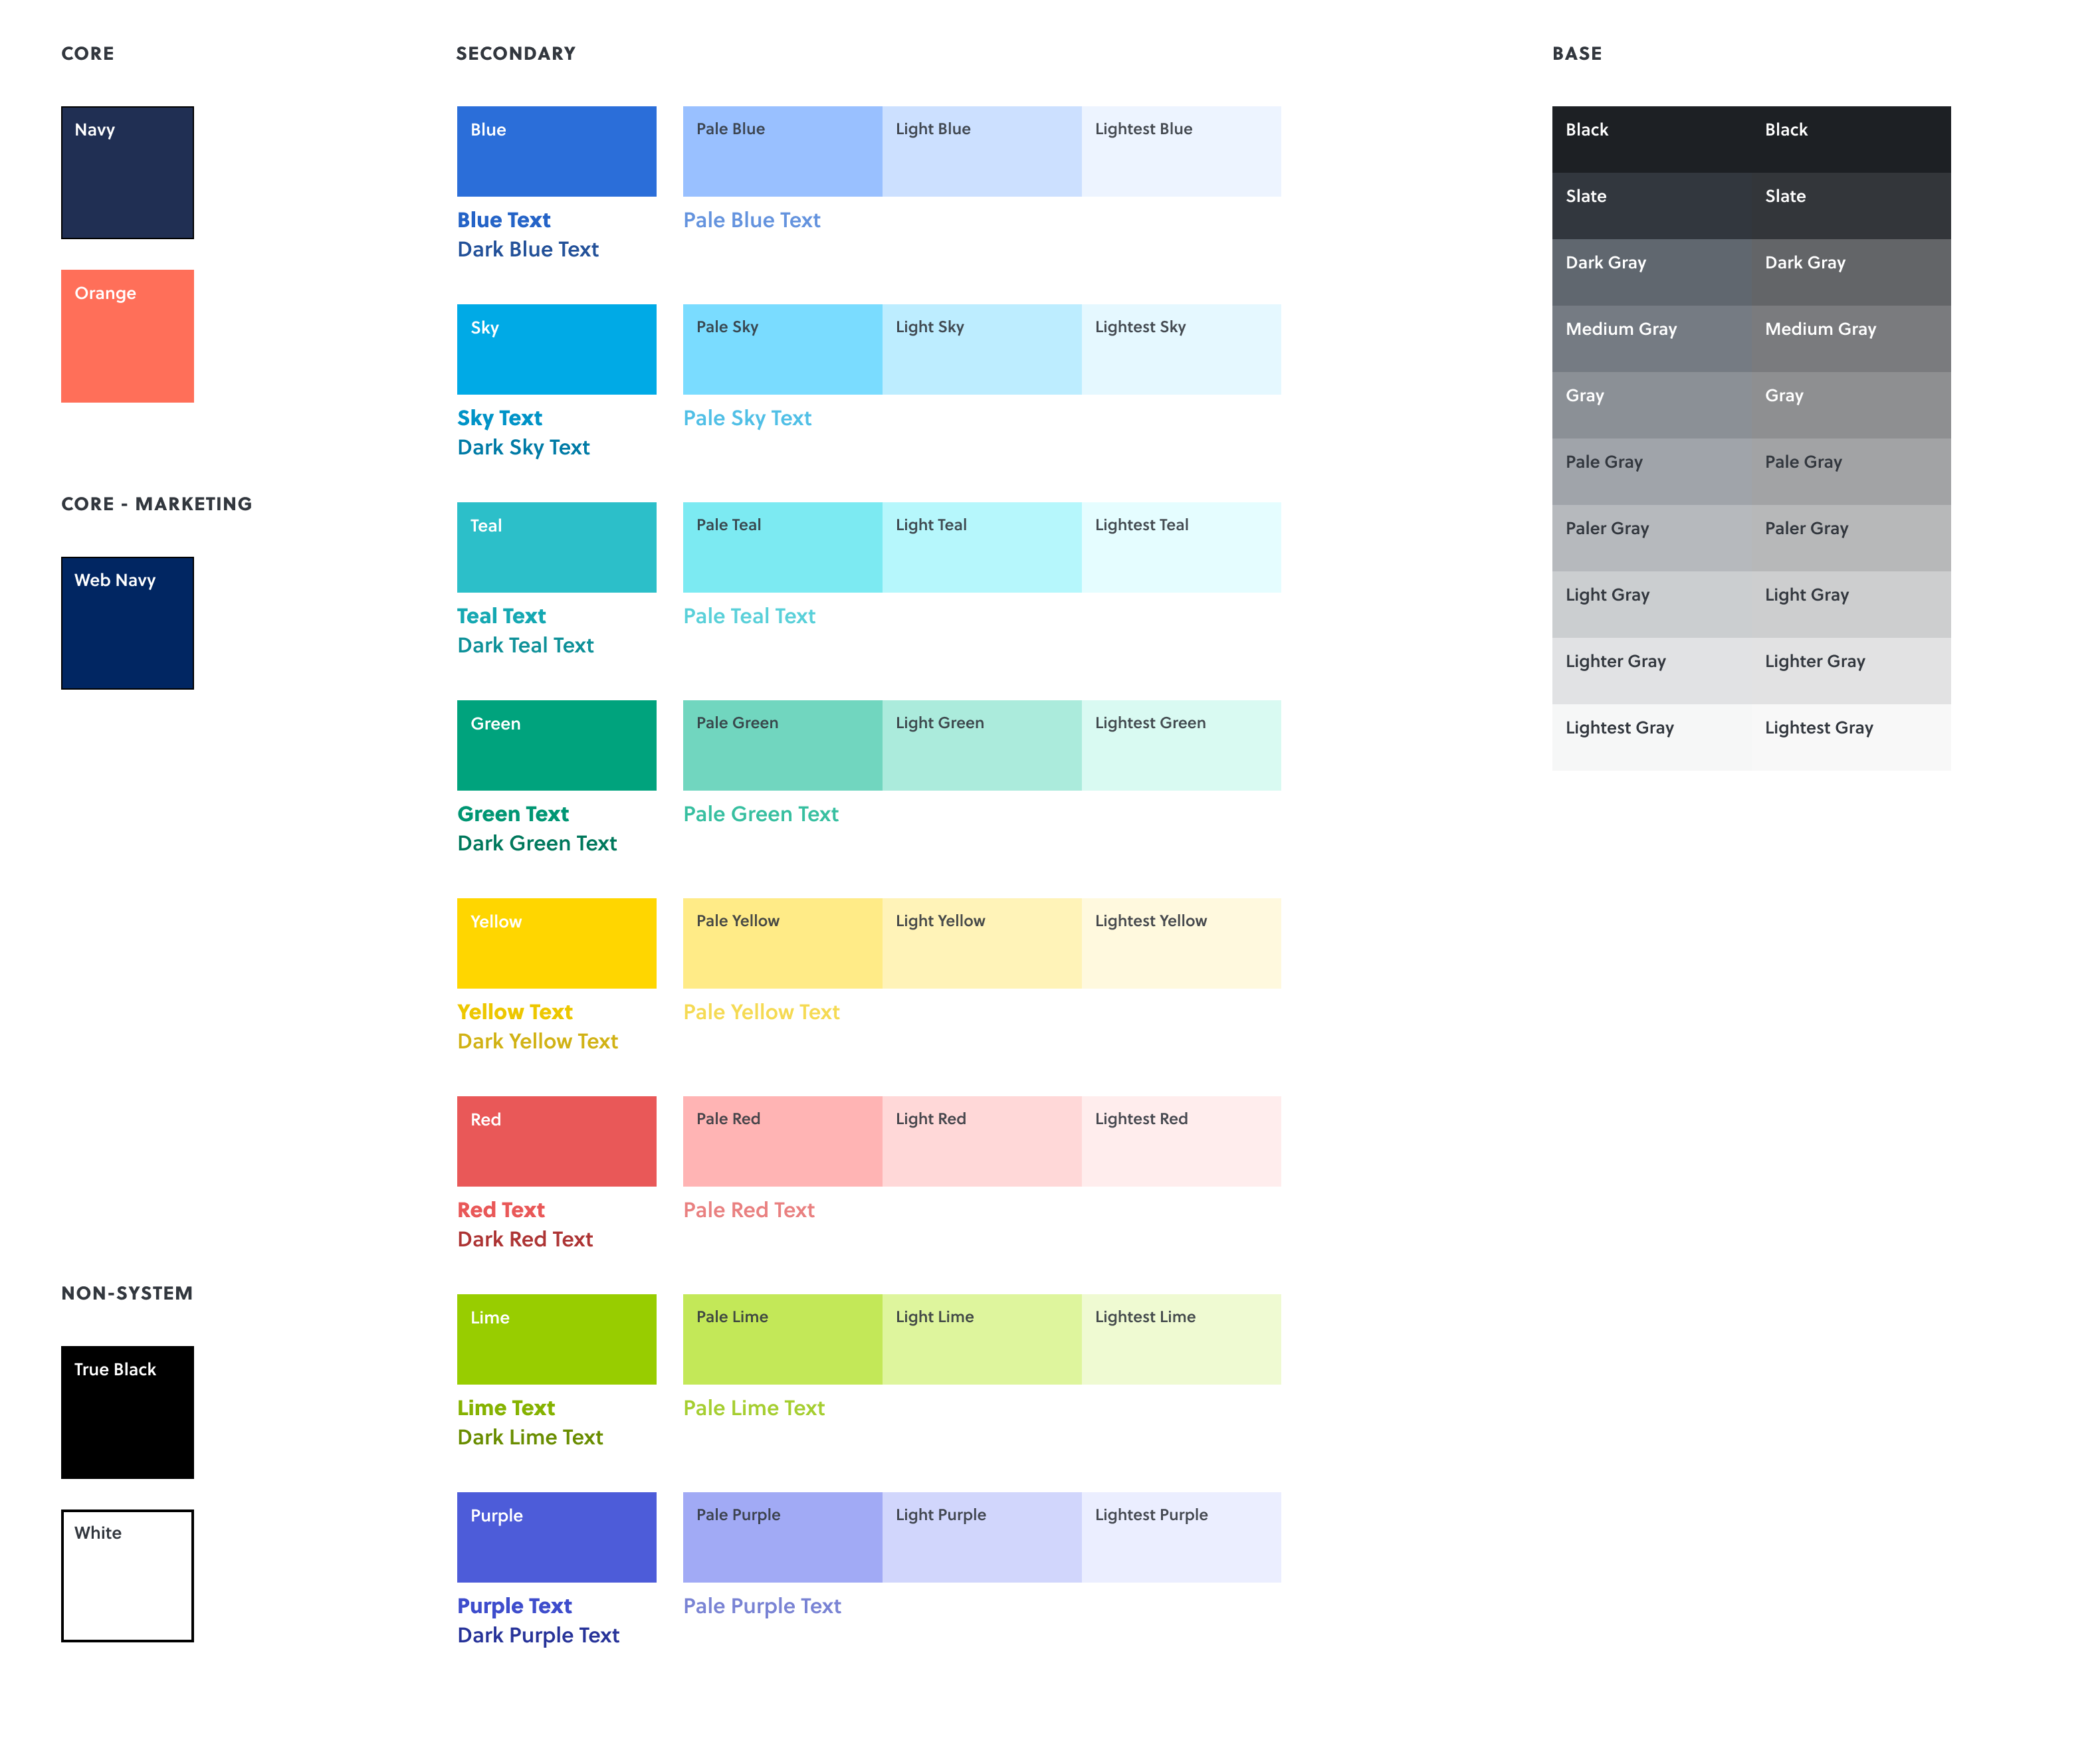 A color palette displaying the colors available in the design system.